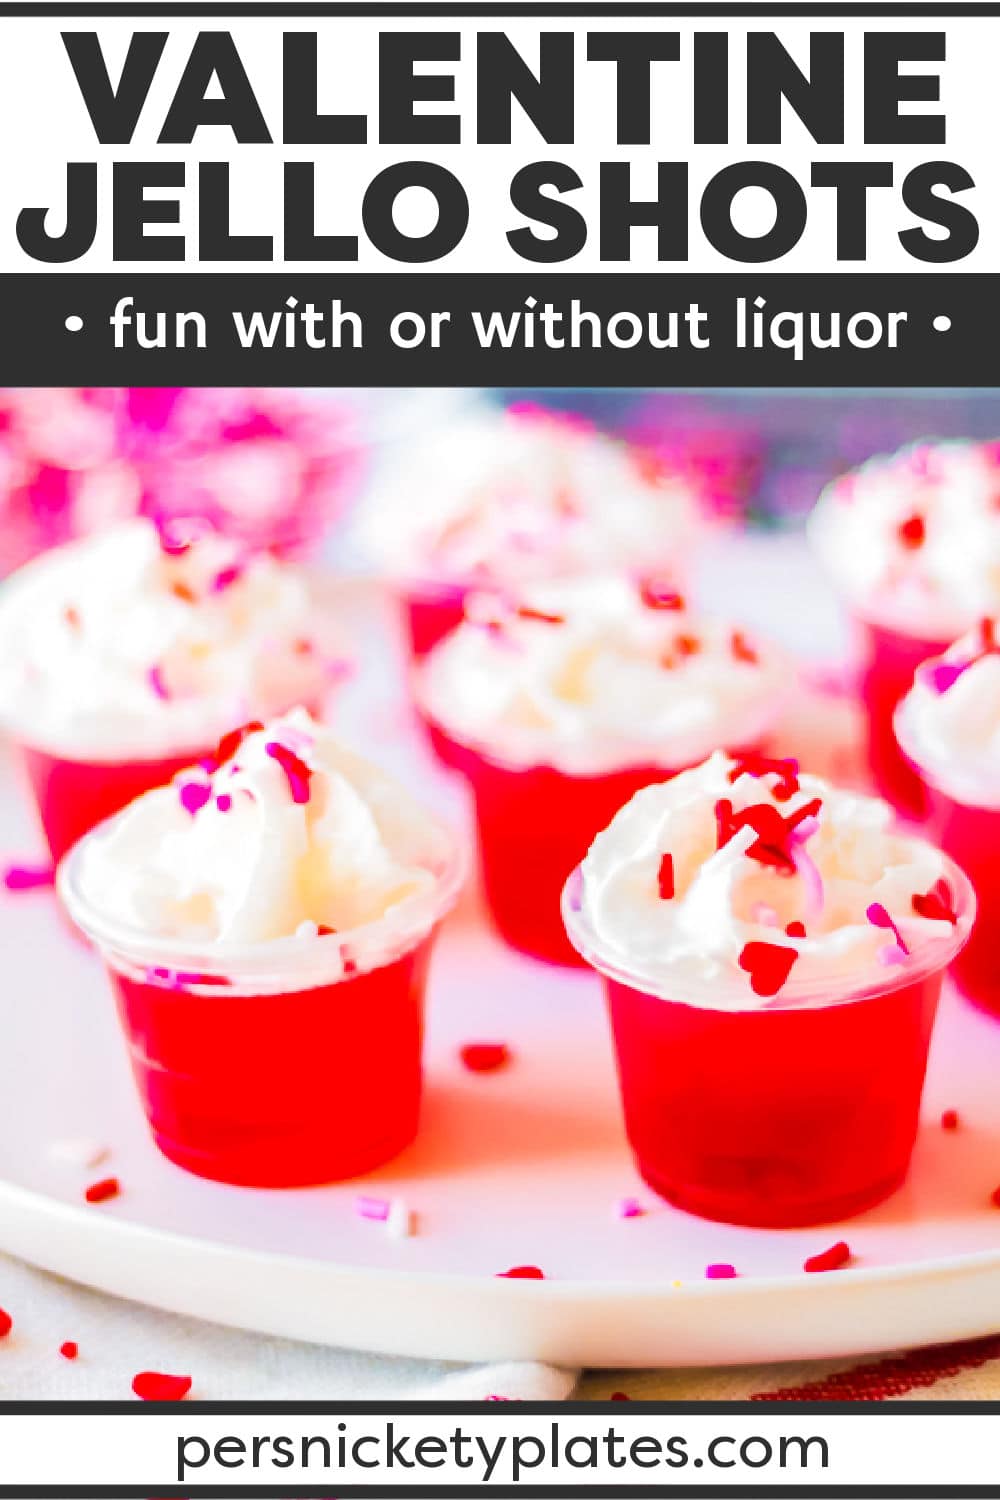 Celebrate Valentine's Day with your loved ones this year with these delicious Valentine's day jello shots! Made with layers of pink and red jello infused with clear vodka (or left non-alcoholic), they couldn't be easier to make. Topped with whipped cream and sprinkles, these irresistible jello shots are always a hit! | www.persnicketyplates.com